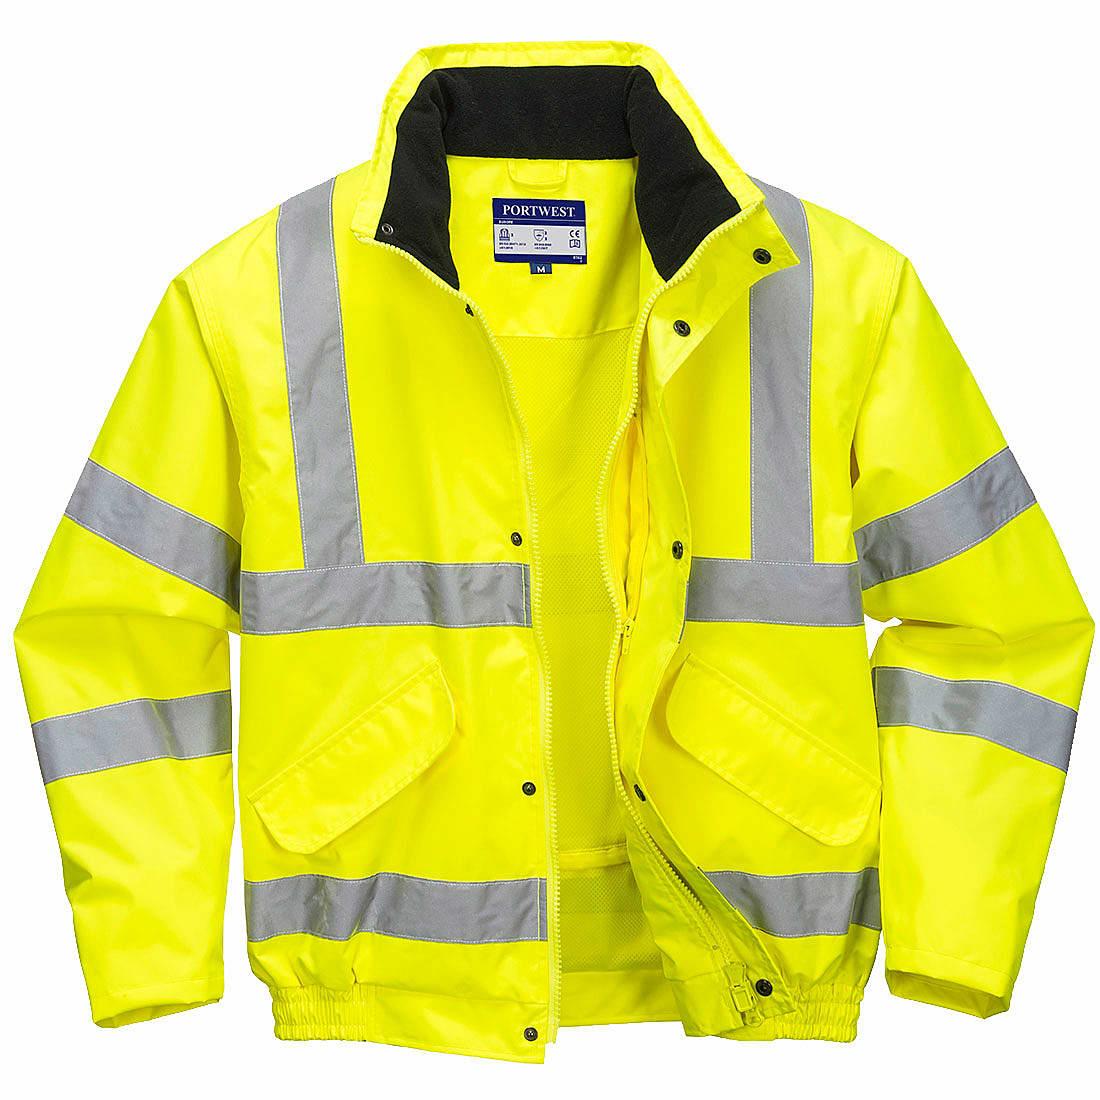 Portwest Hi-Viz Breathable Mesh Lined Jacket in Yellow (Product Code: RT62)